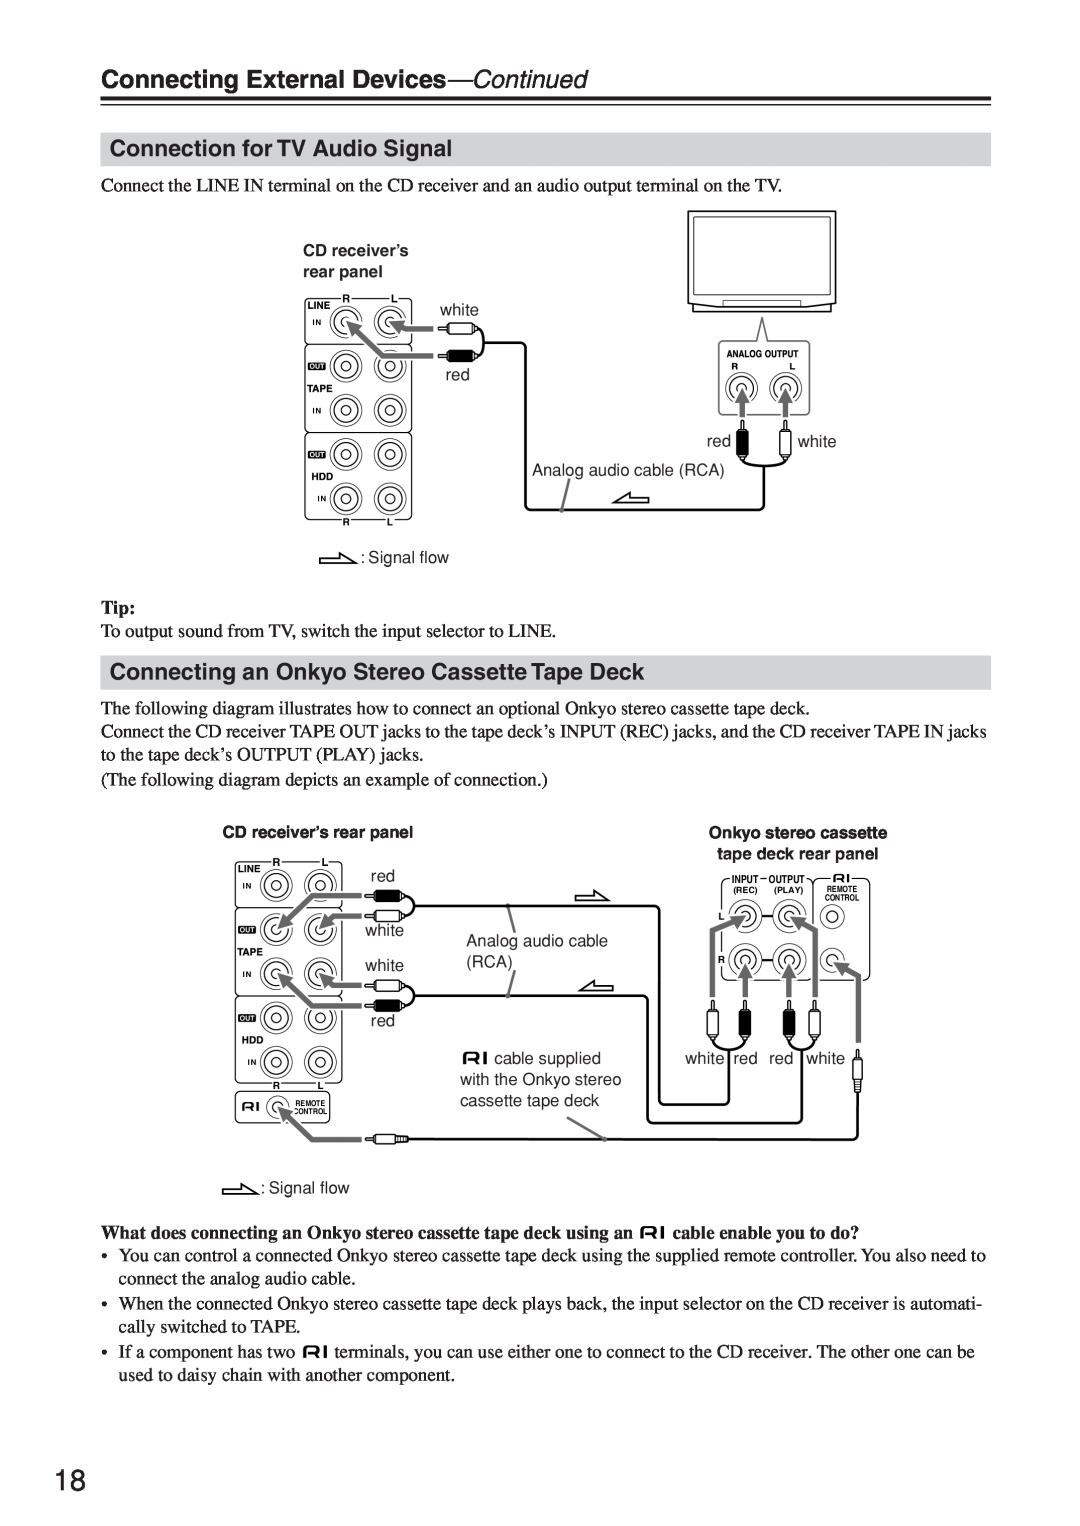 Onkyo CR-N7 instruction manual Connecting External Devices-Continued, Connection for TV Audio Signal 